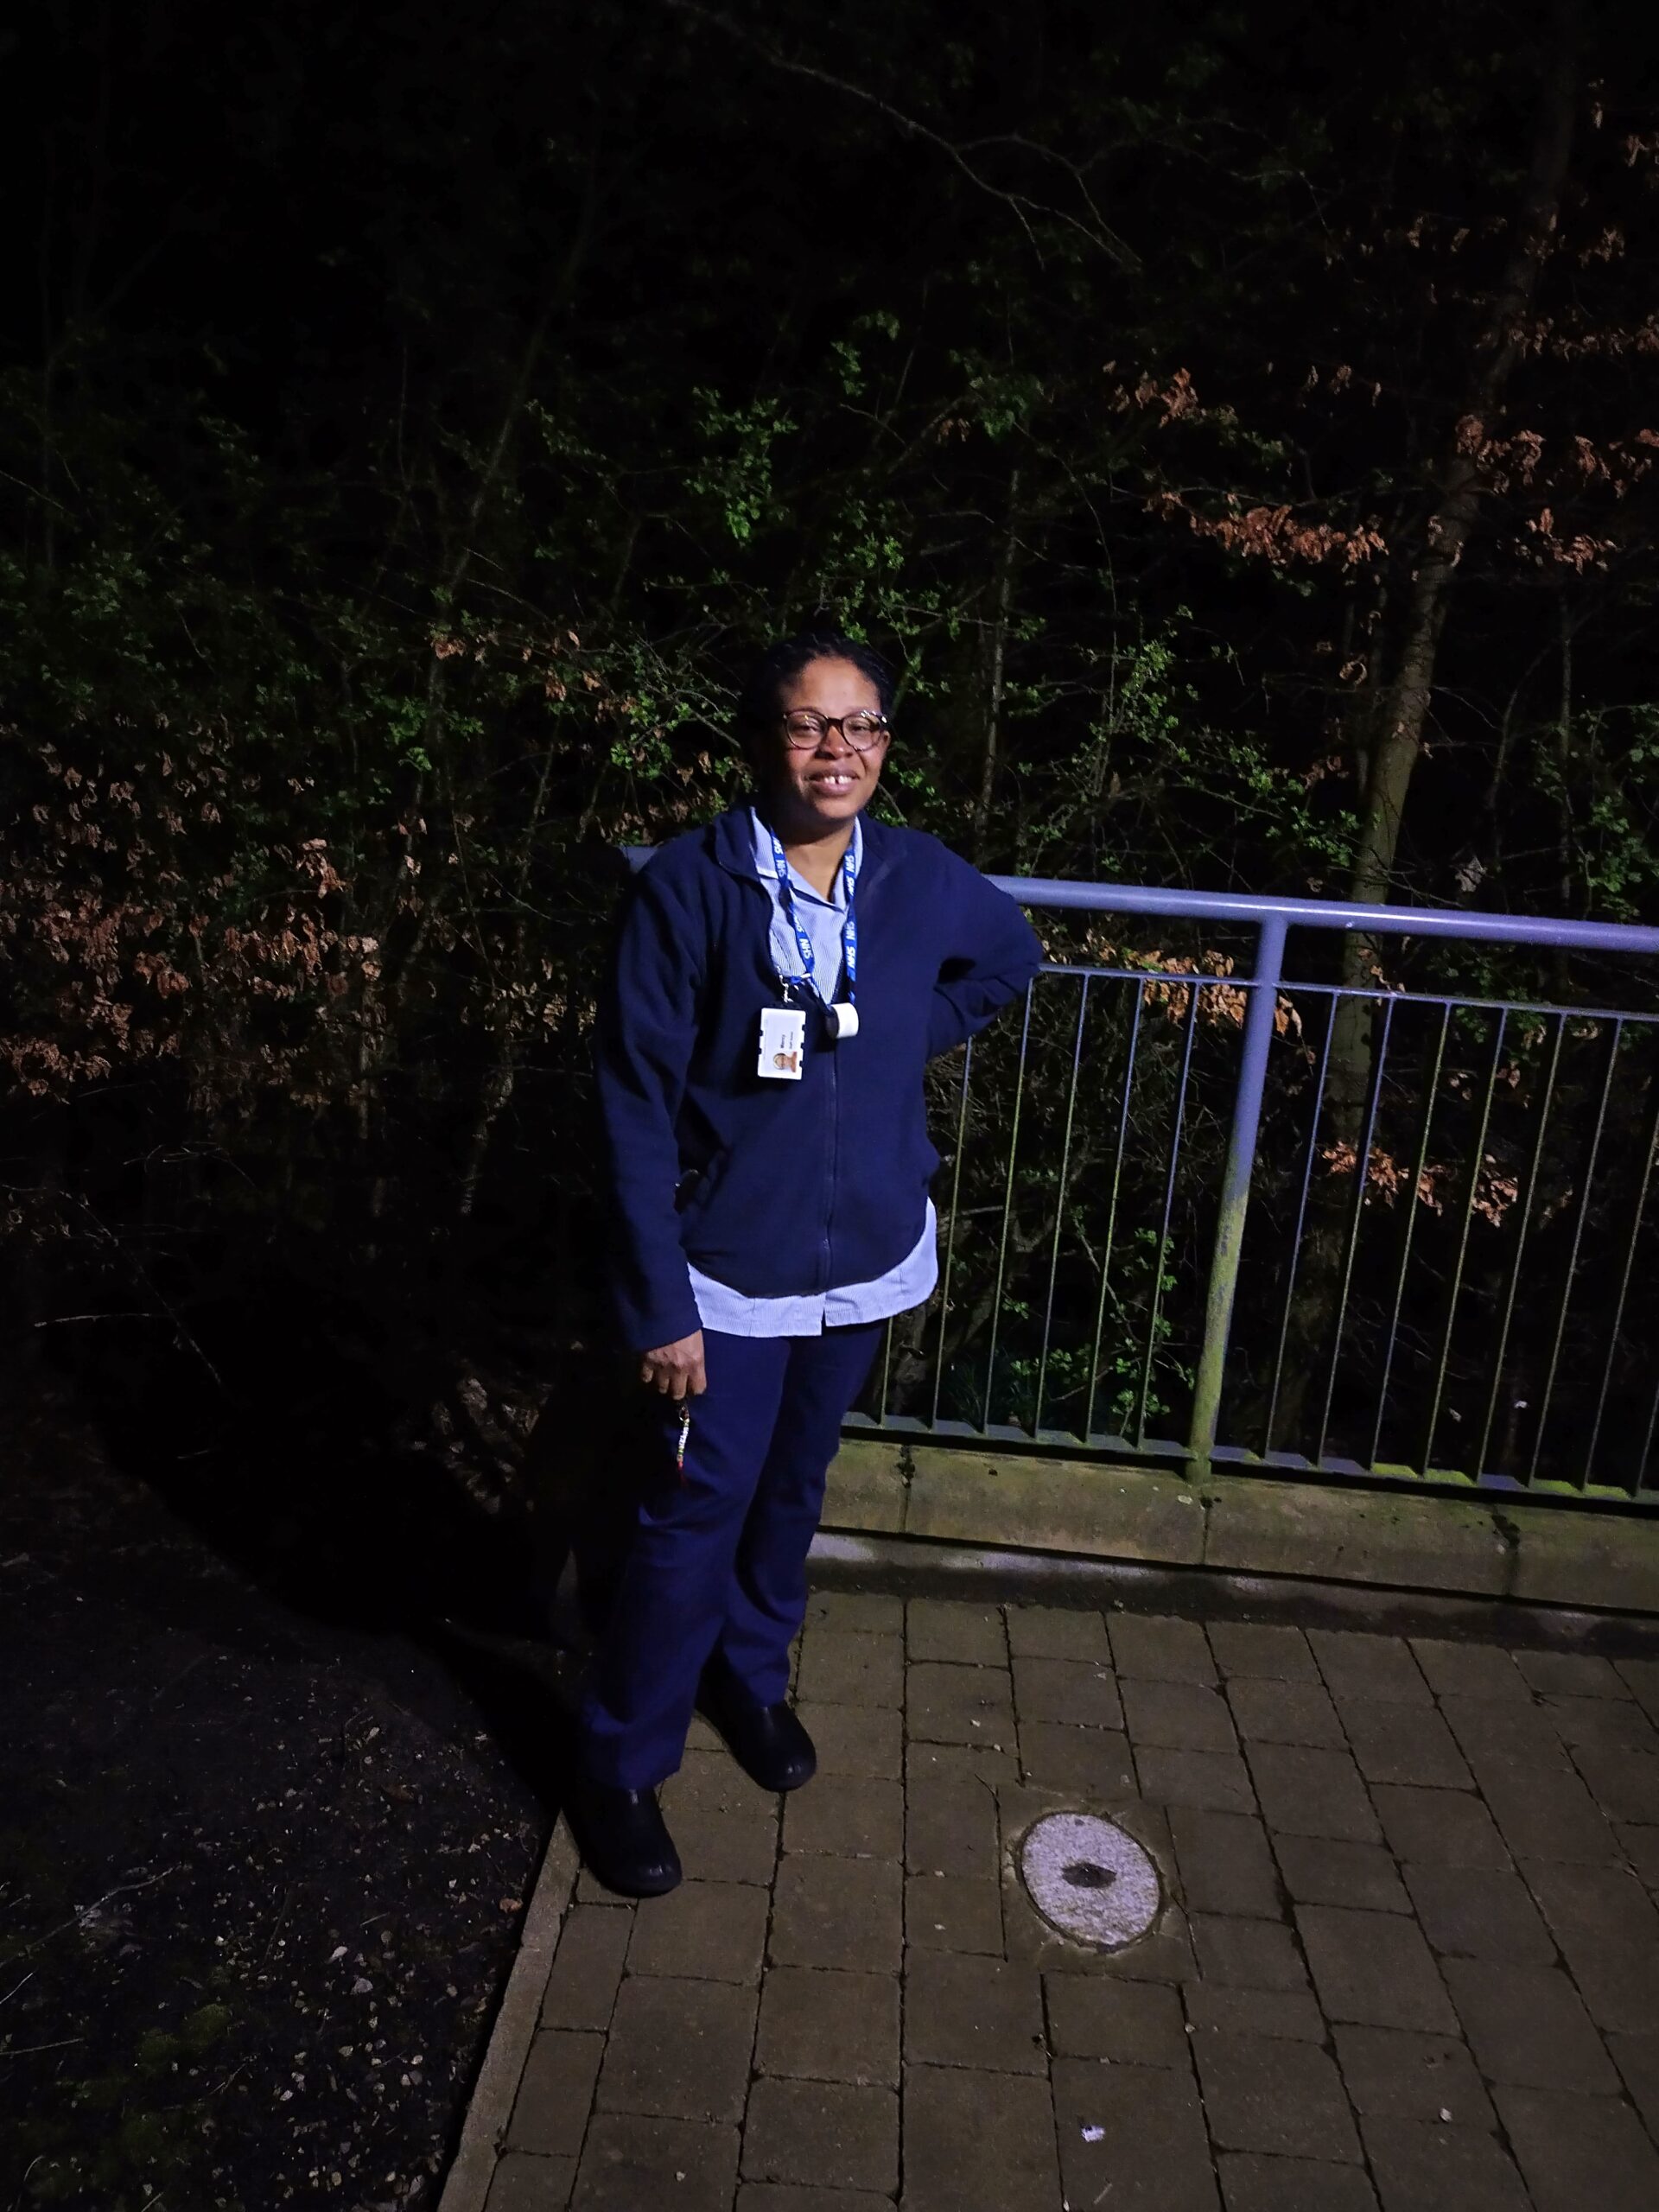 A nurse standing in on a patio with trees behind her at night.